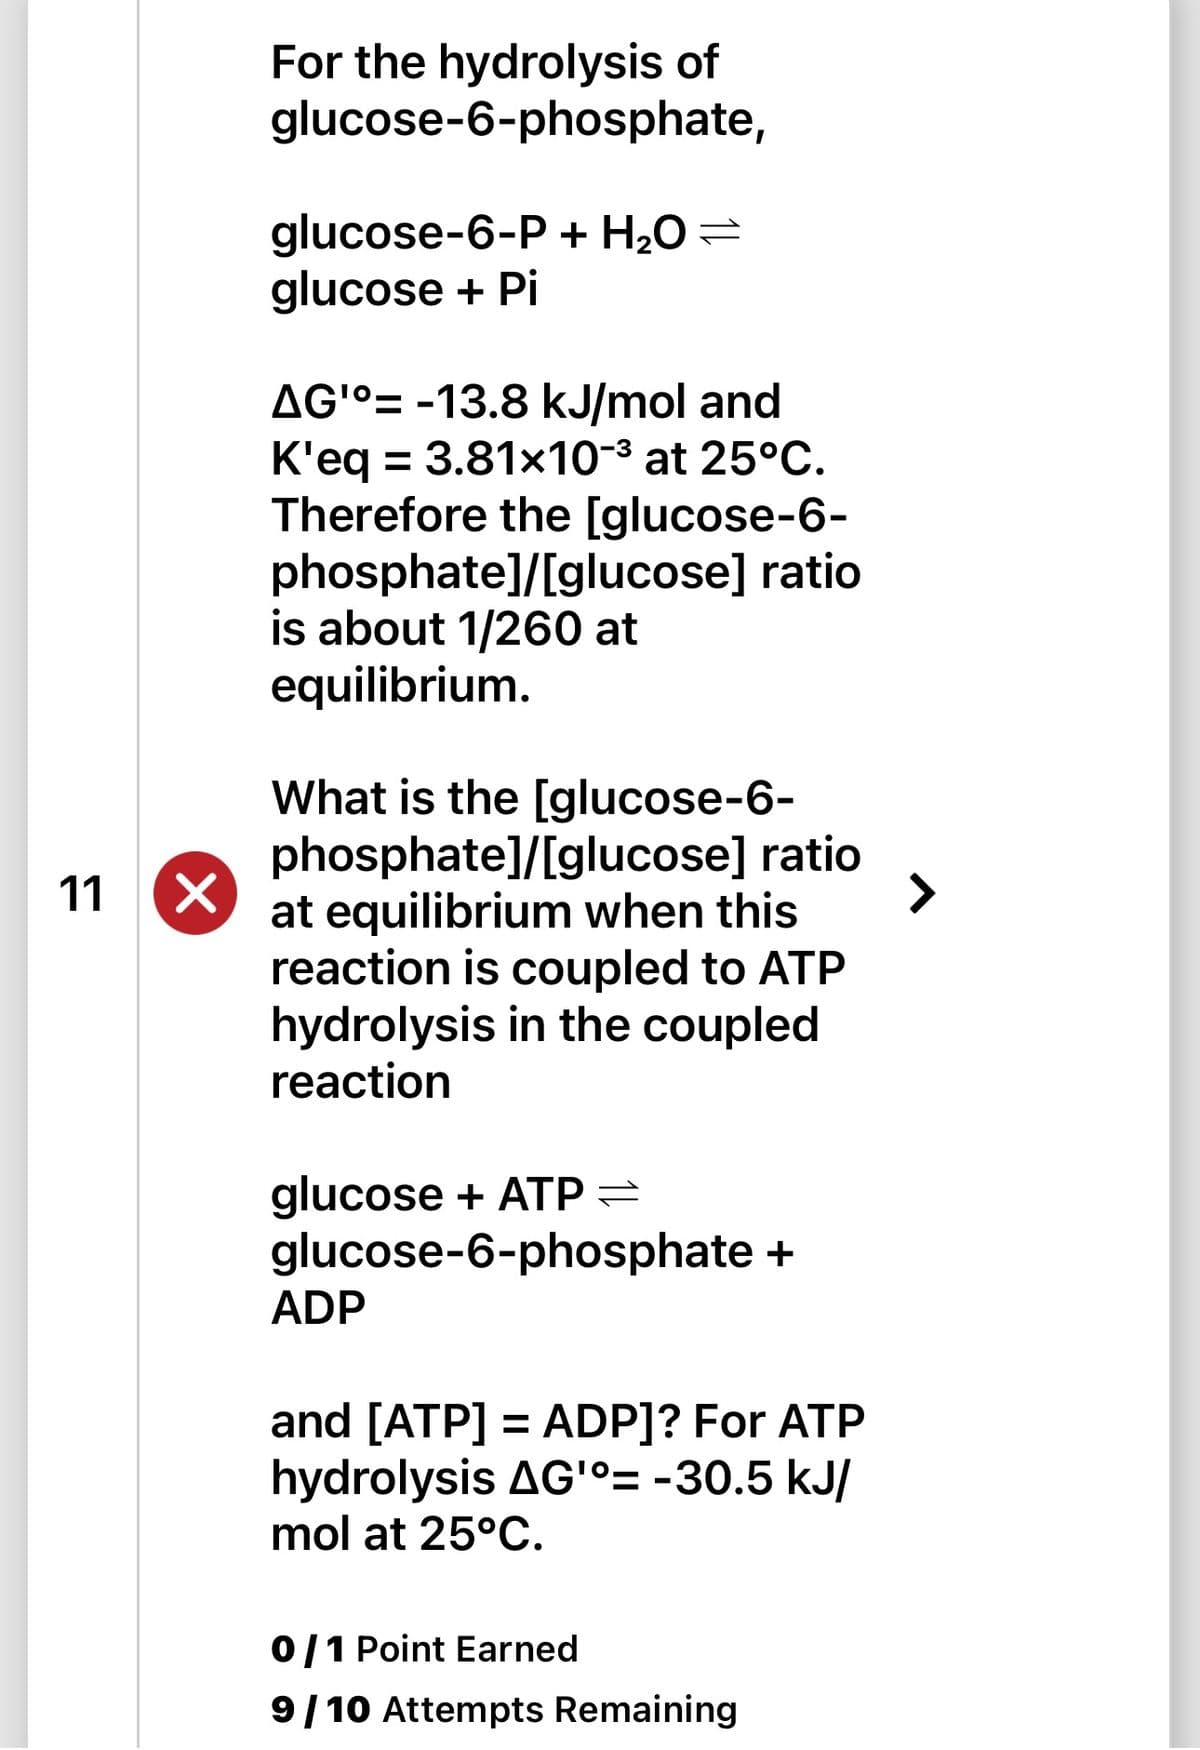 11 X
For the hydrolysis of
glucose-6-phosphate,
glucose-6-P + H₂O =
glucose + Pi
AG'°= -13.8 kJ/mol and
K'eq = 3.81x10-³ at 25°C.
Therefore the [glucose-6-
phosphate]/[glucose] ratio
is about 1/260 at
equilibrium.
What is the [glucose-6-
phosphate]/[glucose] ratio
at equilibrium when this
reaction is coupled to ATP
hydrolysis in the coupled
reaction
glucose + ATP =
glucose-6-phosphate +
ADP
and [ATP] = ADP]? For ATP
hydrolysis AG'°= -30.5 kJ/
mol at 25°C.
0/1 Point Earned
9/10 Attempts Remaining